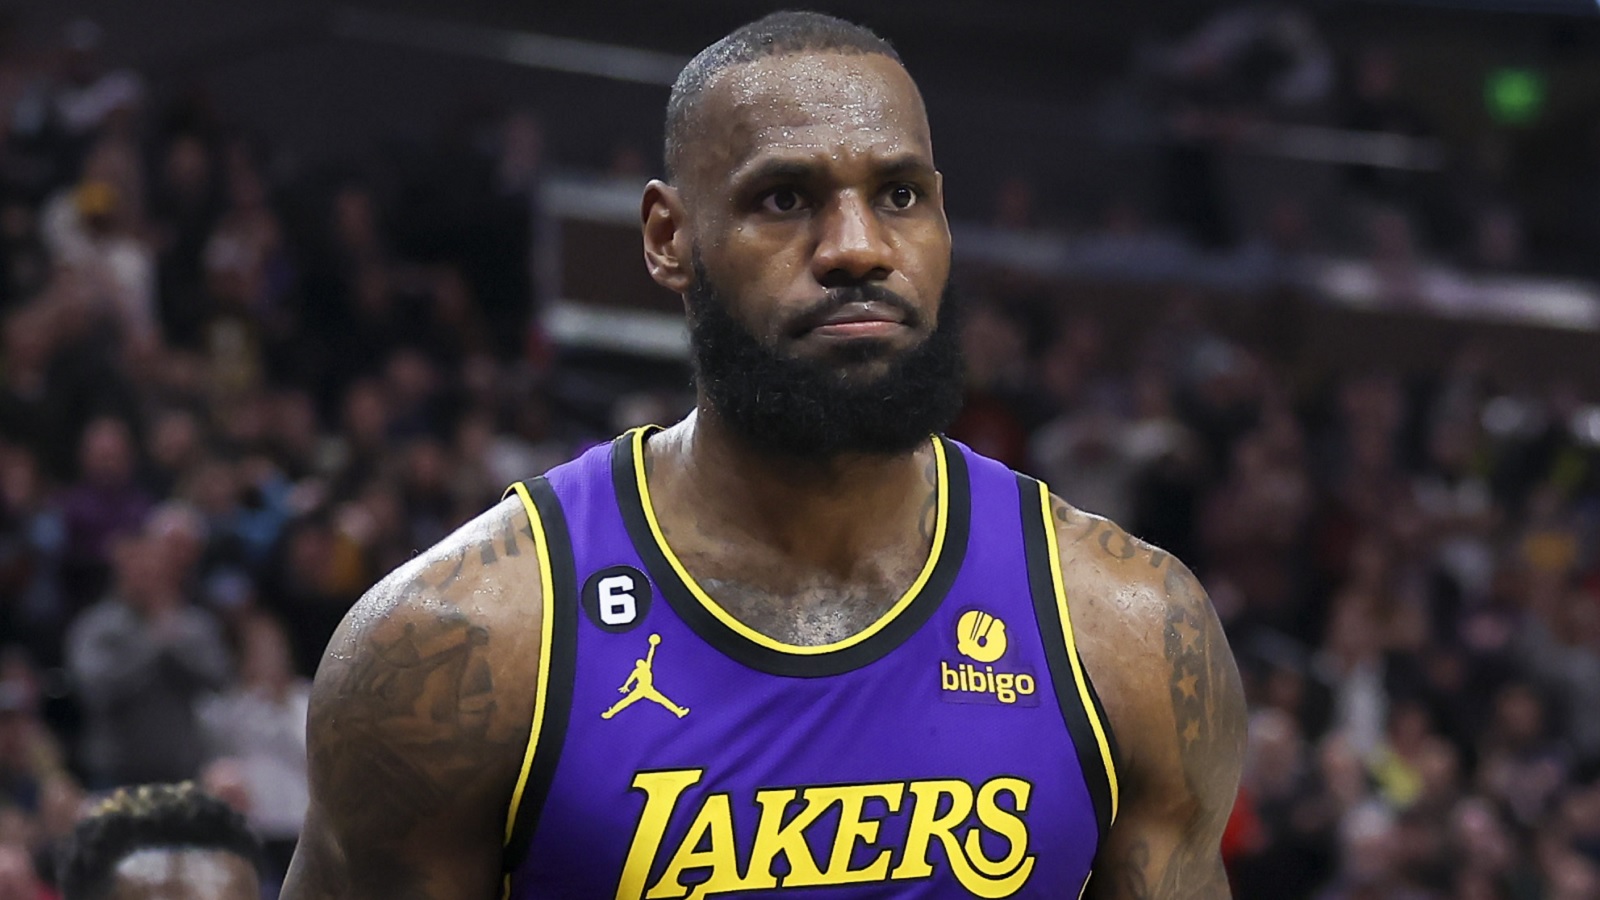 Lakers star LeBron James fires back at 'lames' after Michael